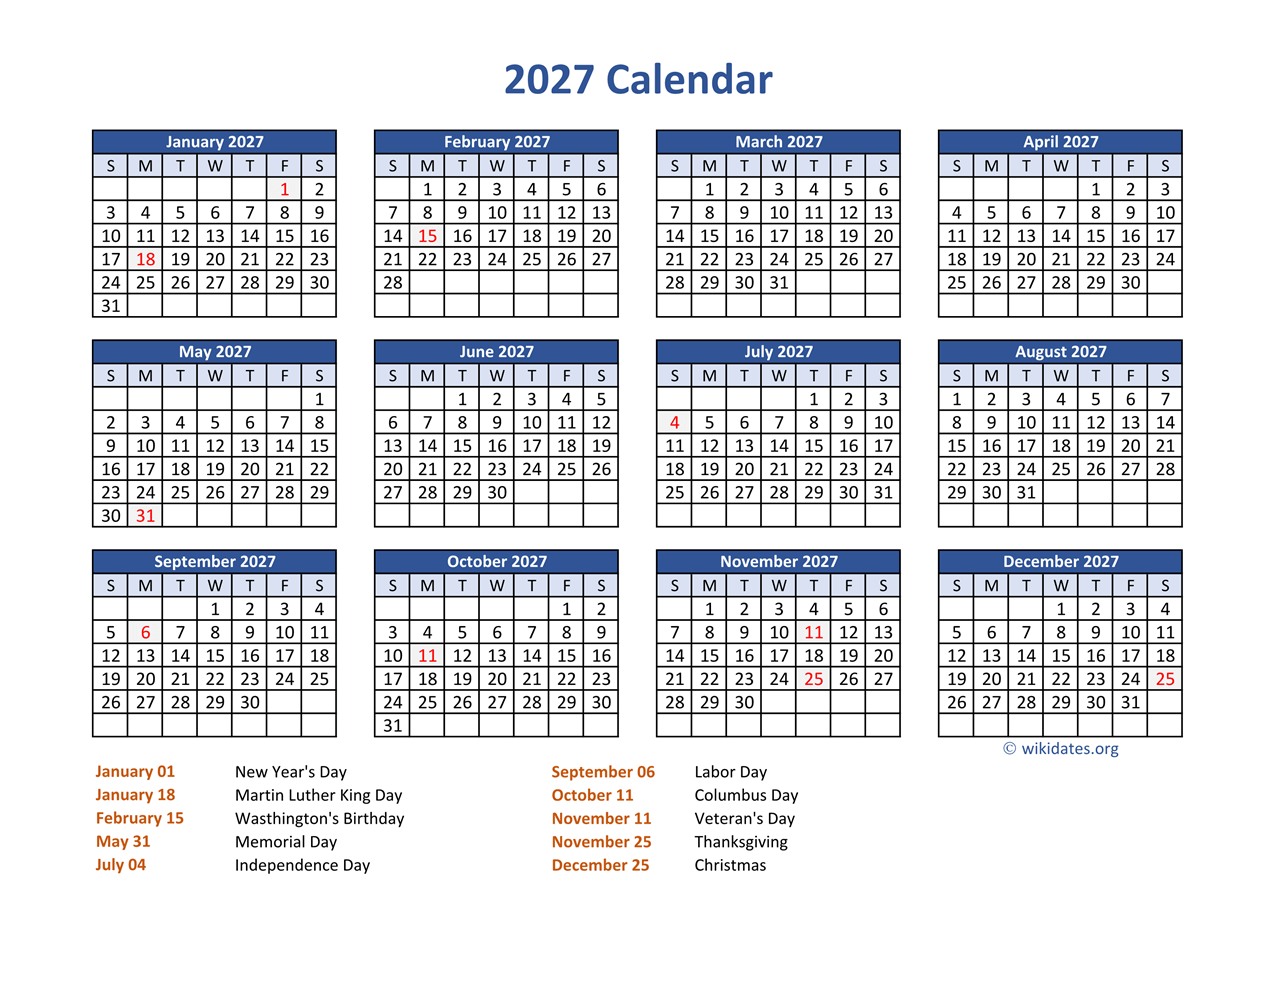 Calendar 2027 Uk With Bank Holidays And Week Numbers